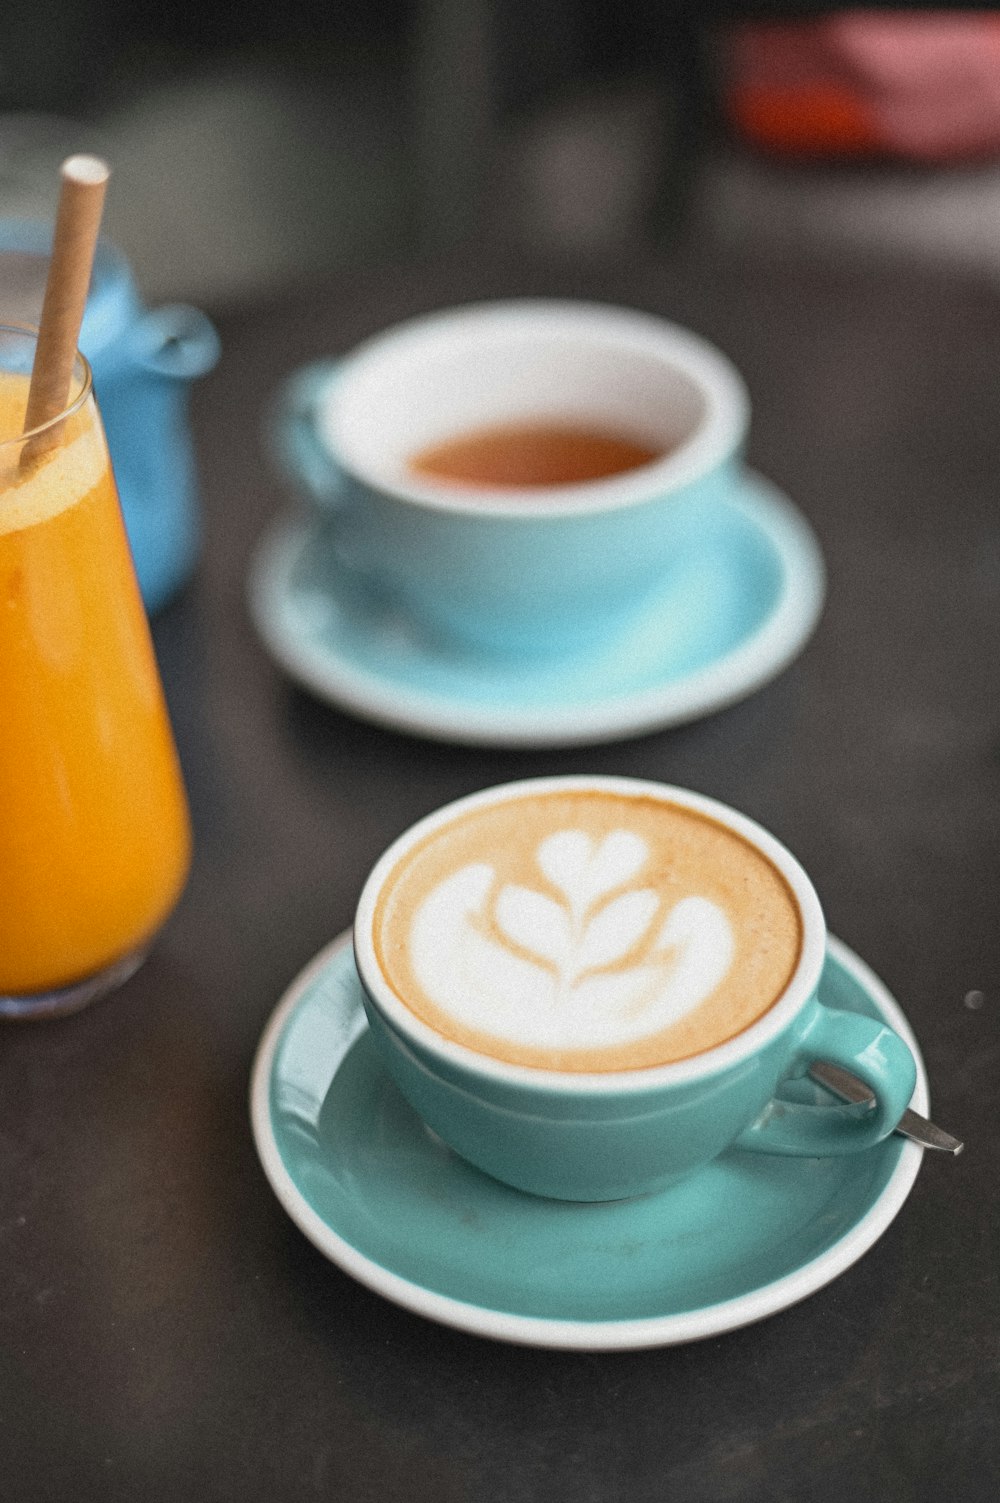 a cappuccino on a saucer and a cup of orange juice